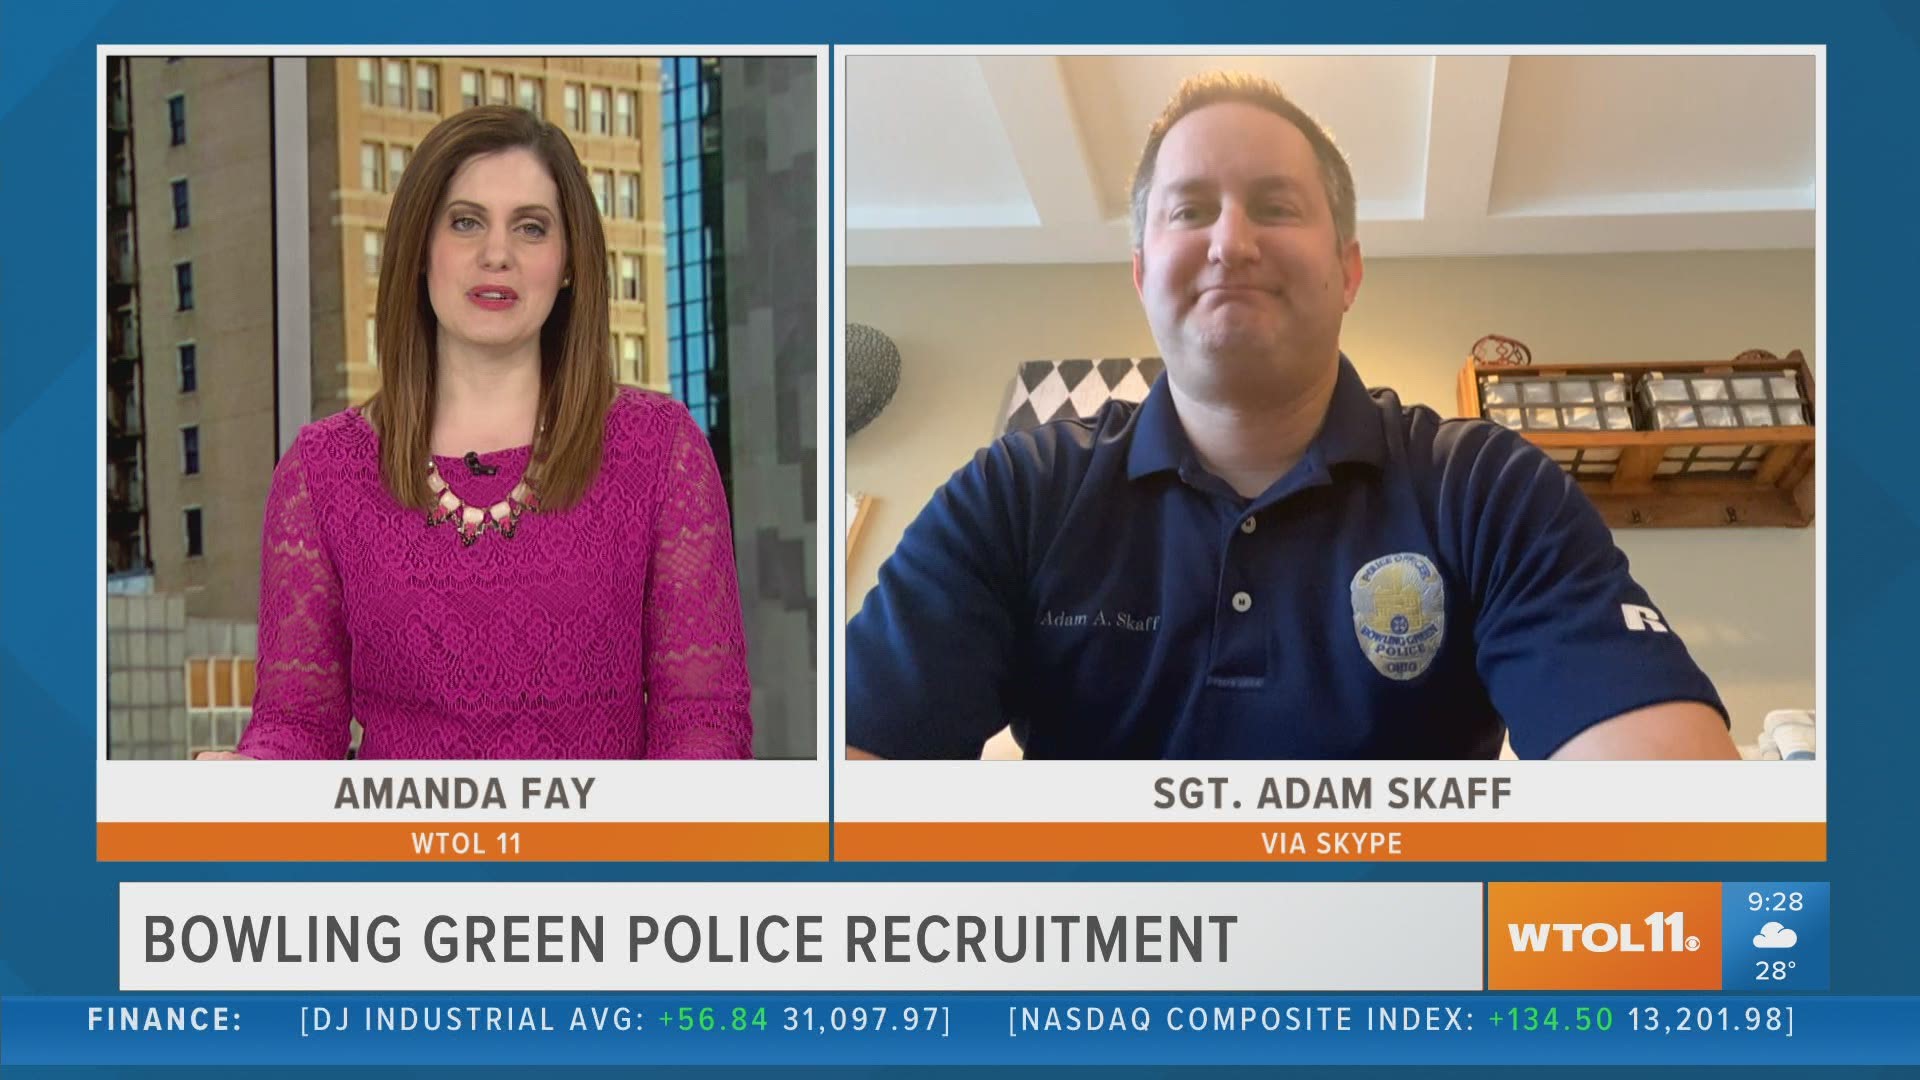 Sgt. Adam Skaff joined Amanda Fay Monday morning from the Bowling Green Police Division, where they're looking for new officers to join the force.